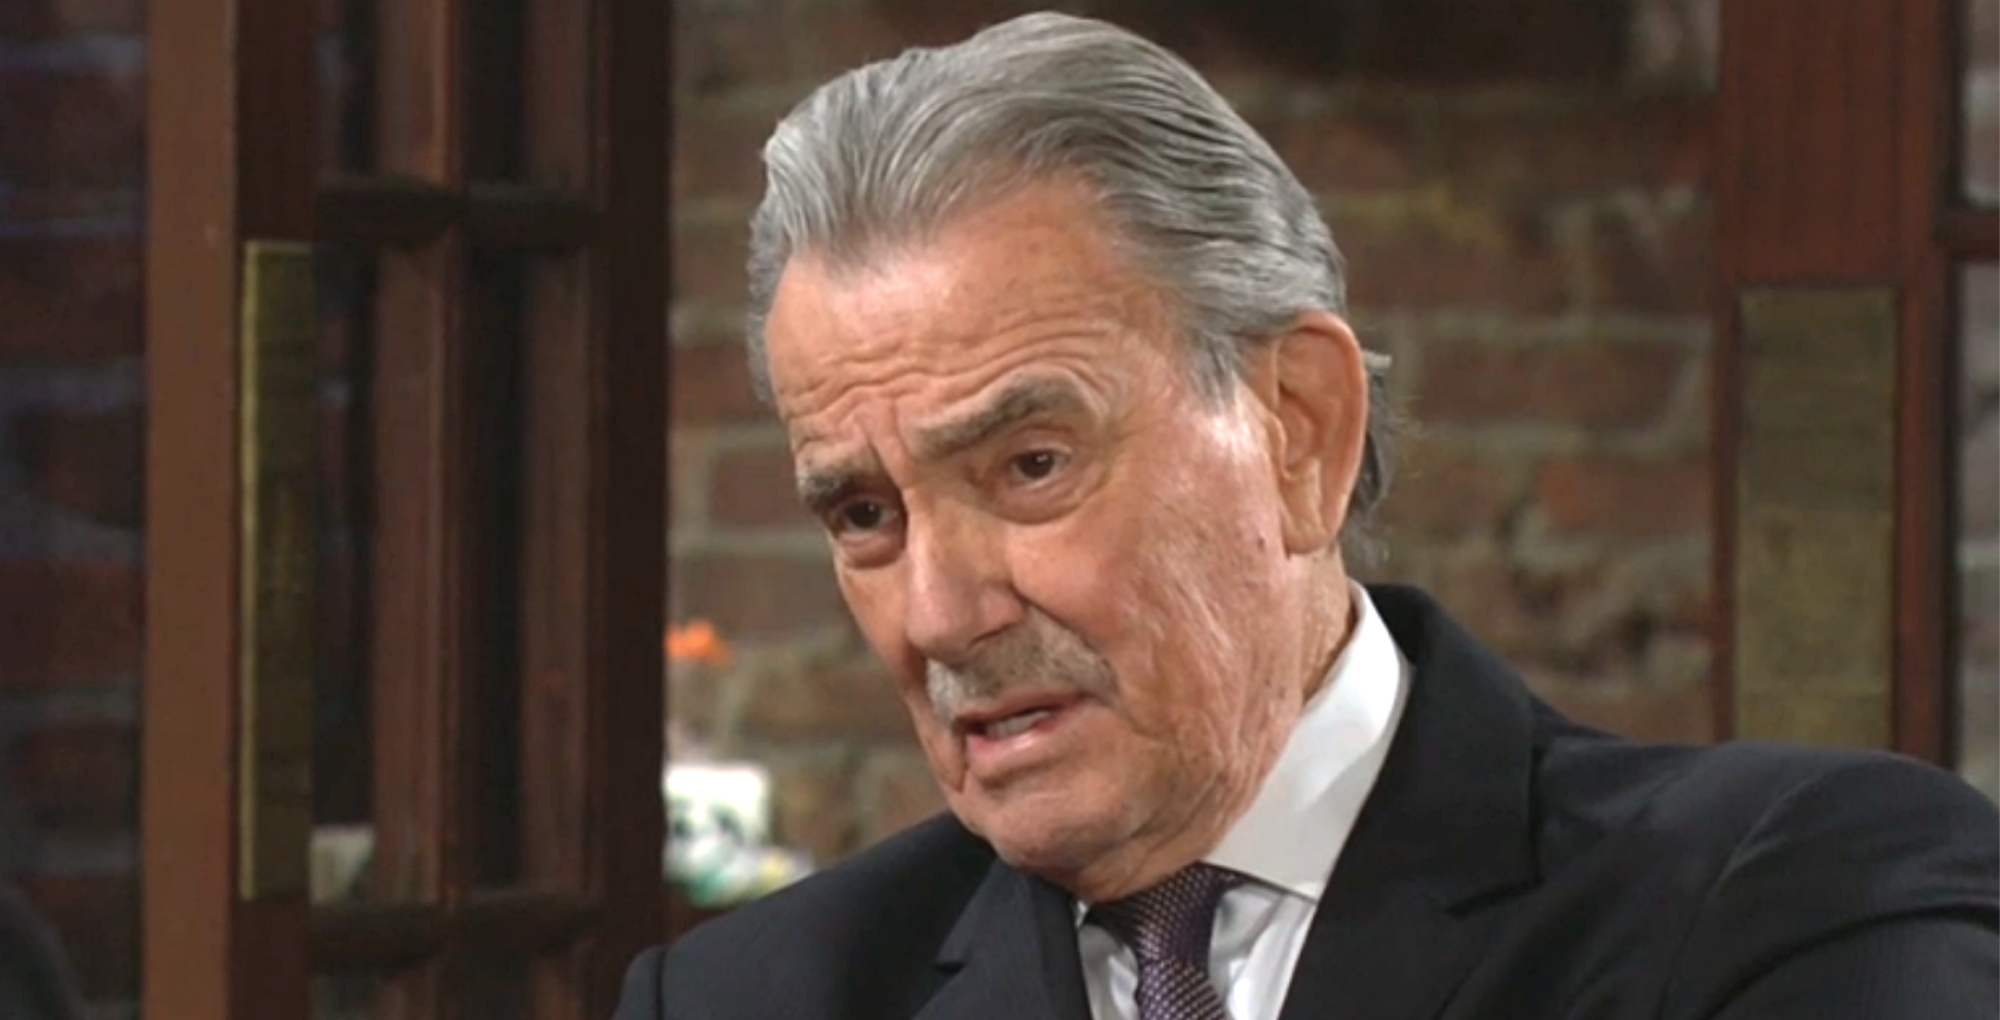 young and the restless spoilers for march 8, 2023 have victor newman making a deal